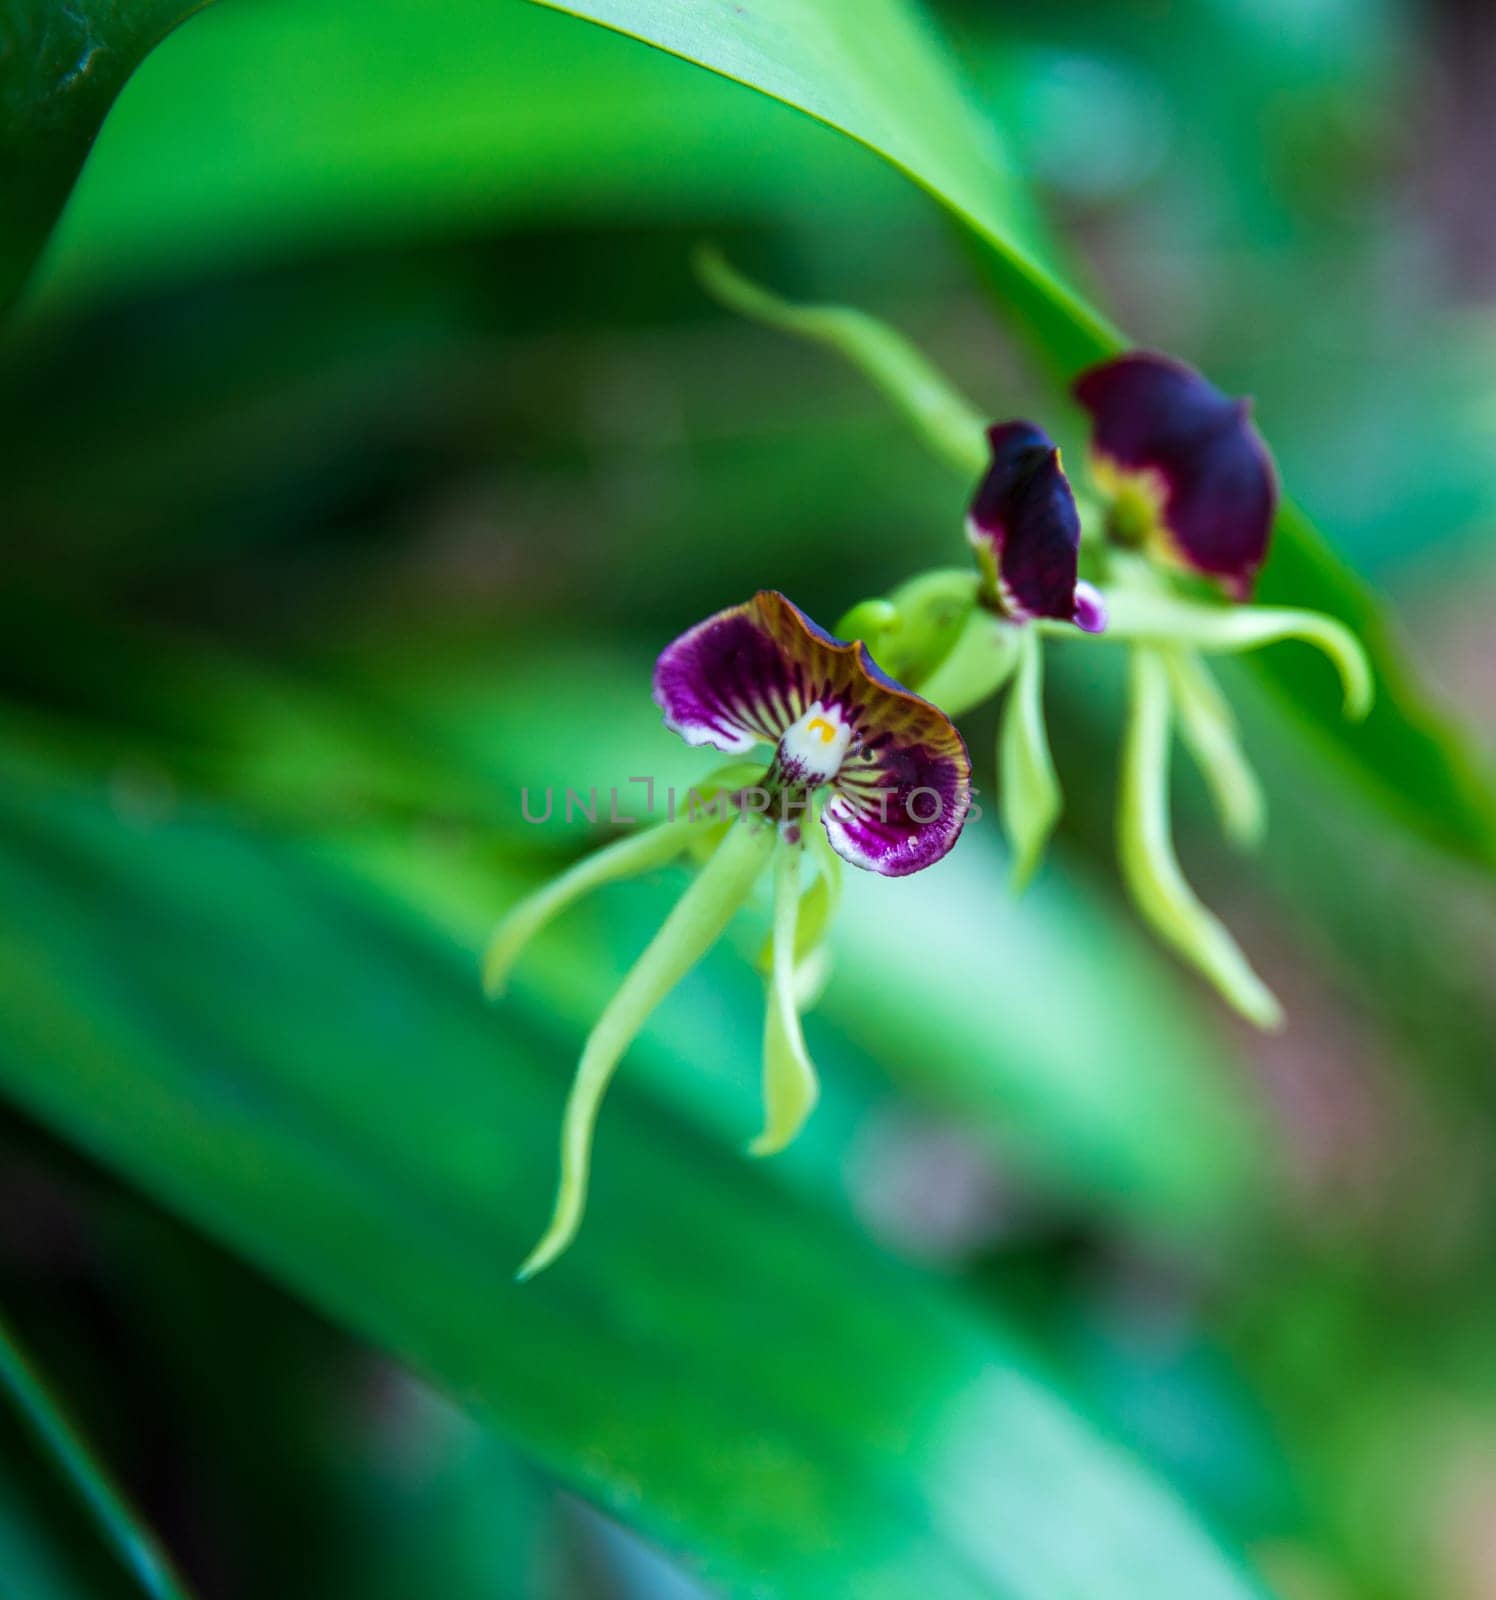 Belize National Flower called the Black Orchid